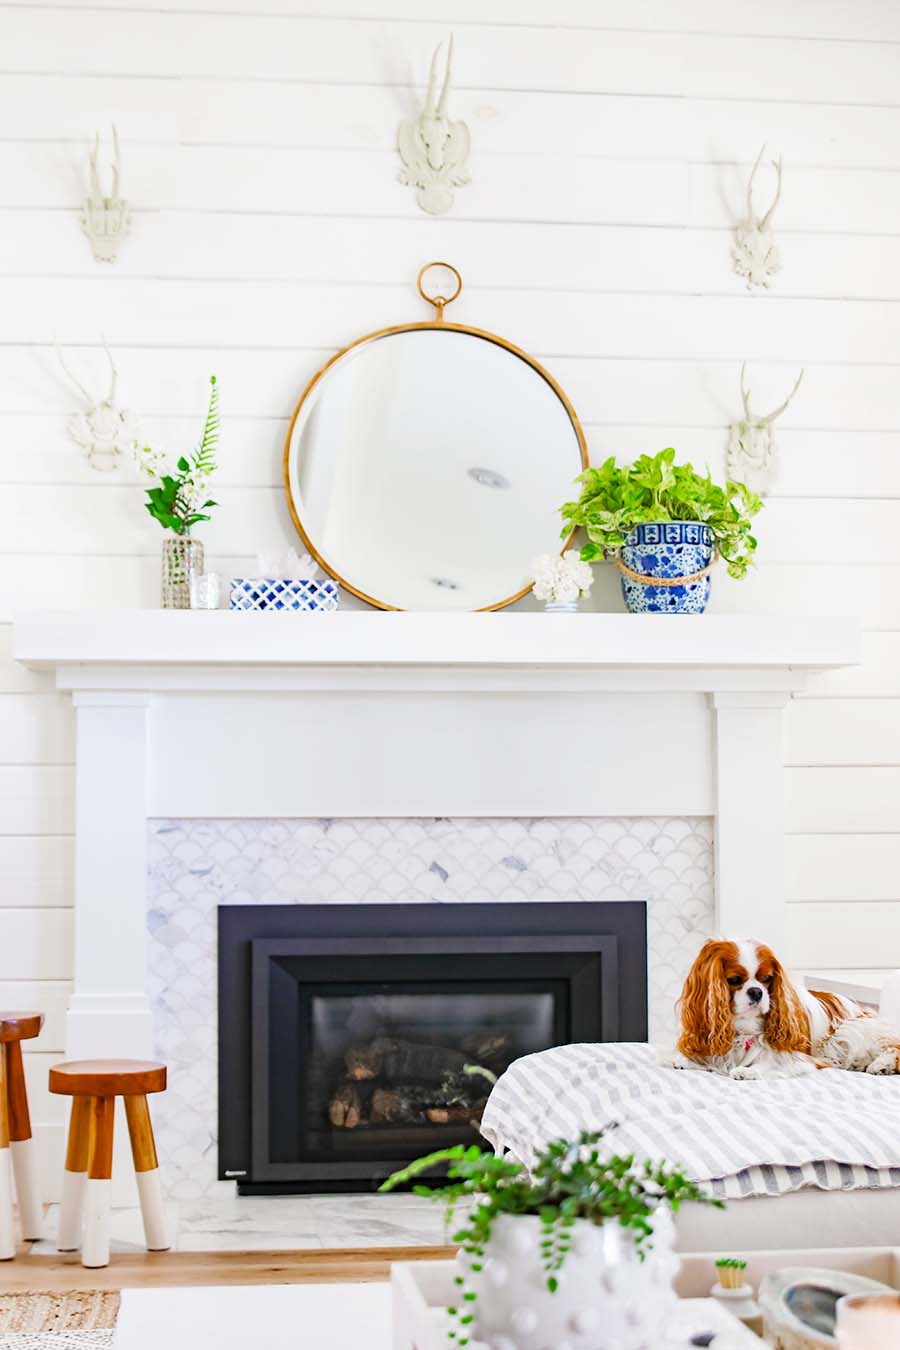 Summer Mantel Decor In Blue And White, Living Room Fireplace Mantel Decorating Ideas